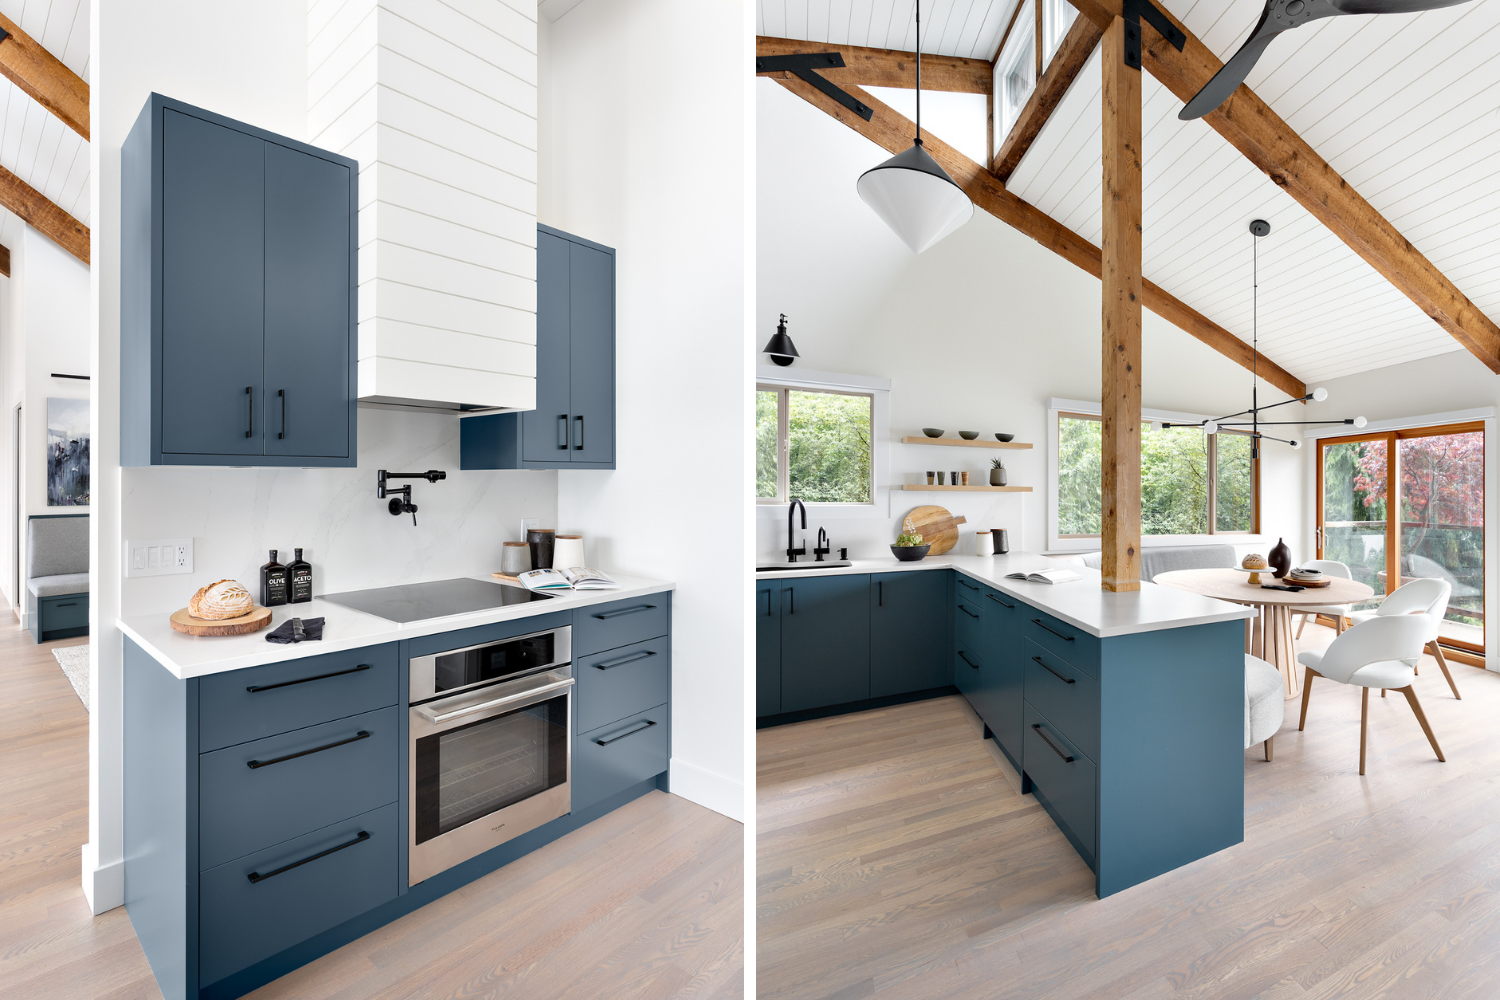 Simply-Home-Decorating-North-Vancouver-Kitchen-Whole-Home-Renovation-Everyday-Luxury-Blue-Cabinets-Post-and-beam-Lions-Bay